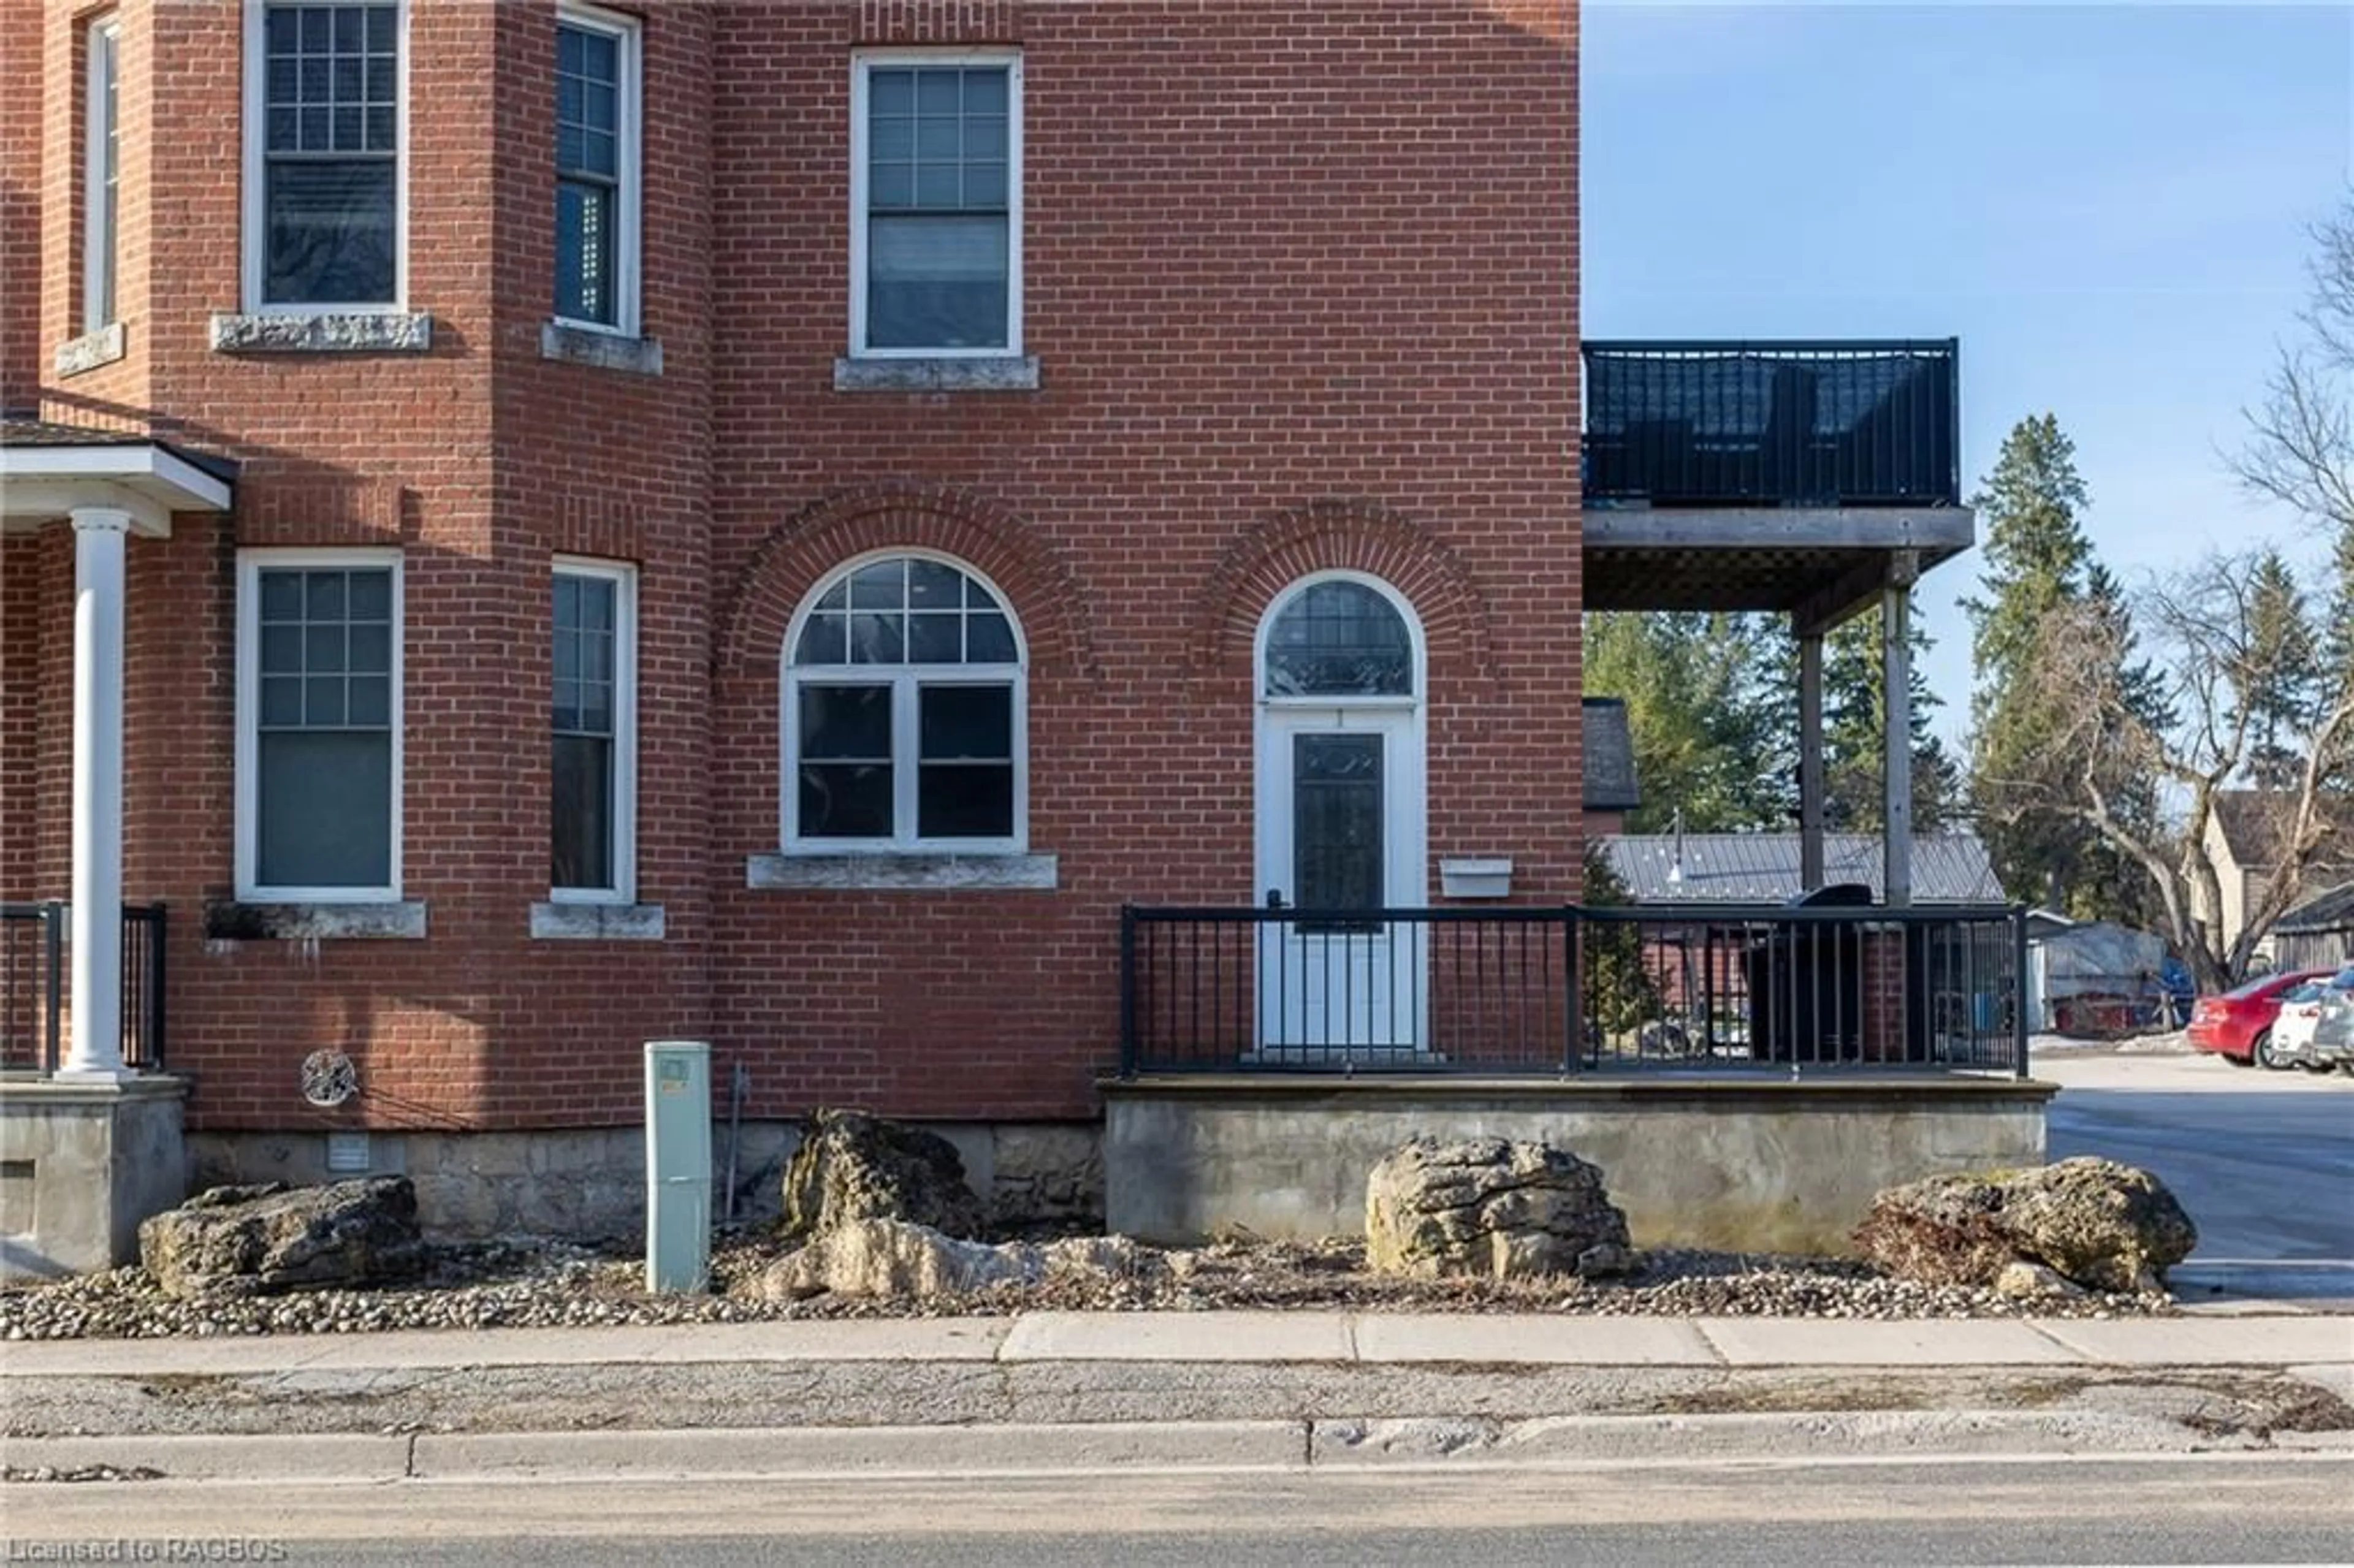 Home with brick exterior material for 355 Princess St #1, Shallow Lake Ontario N0H 2K0